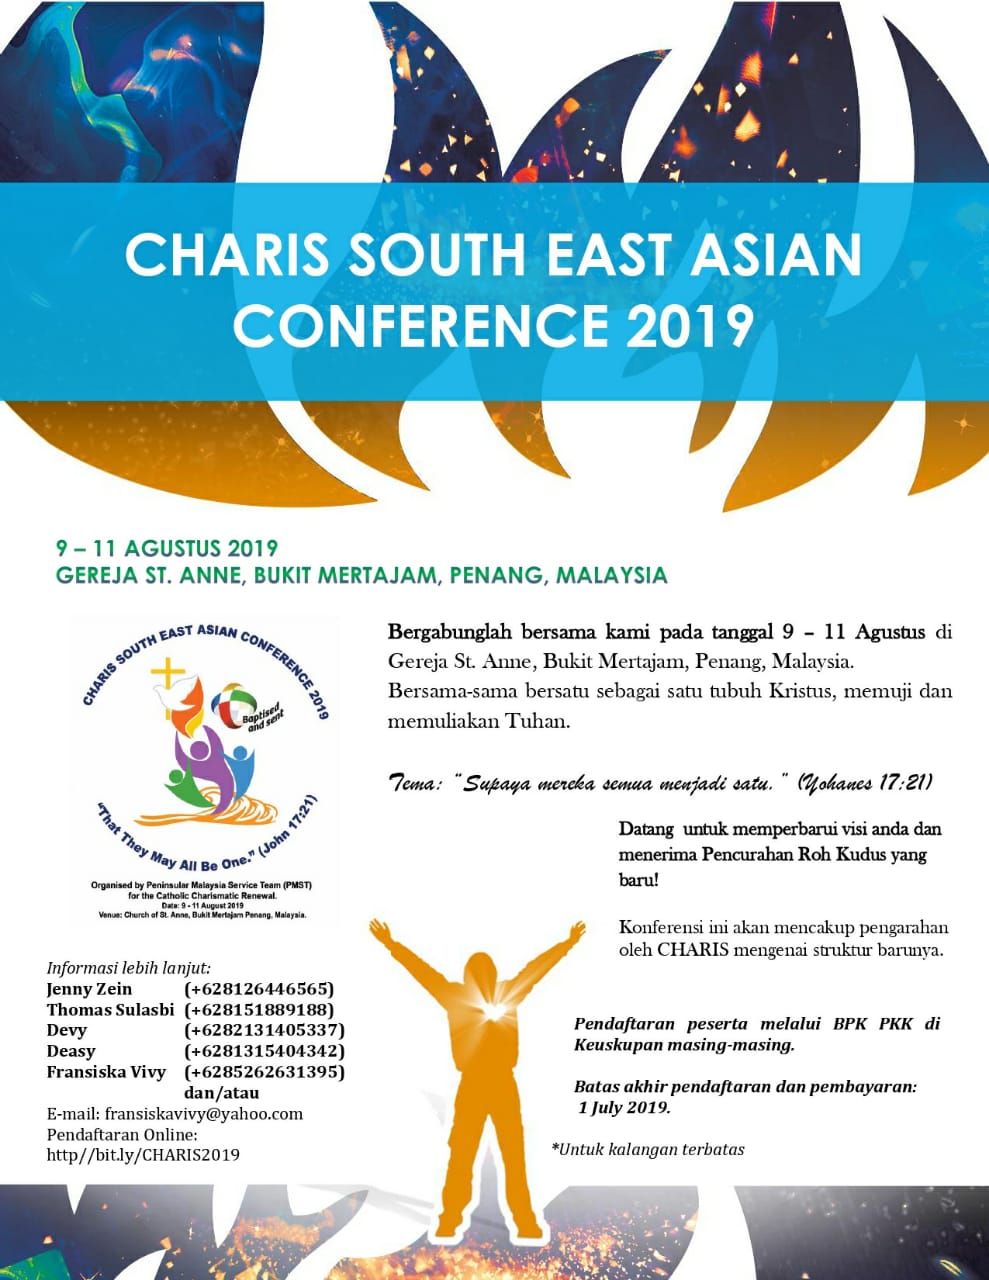 Charis South East Asian Conference 2019